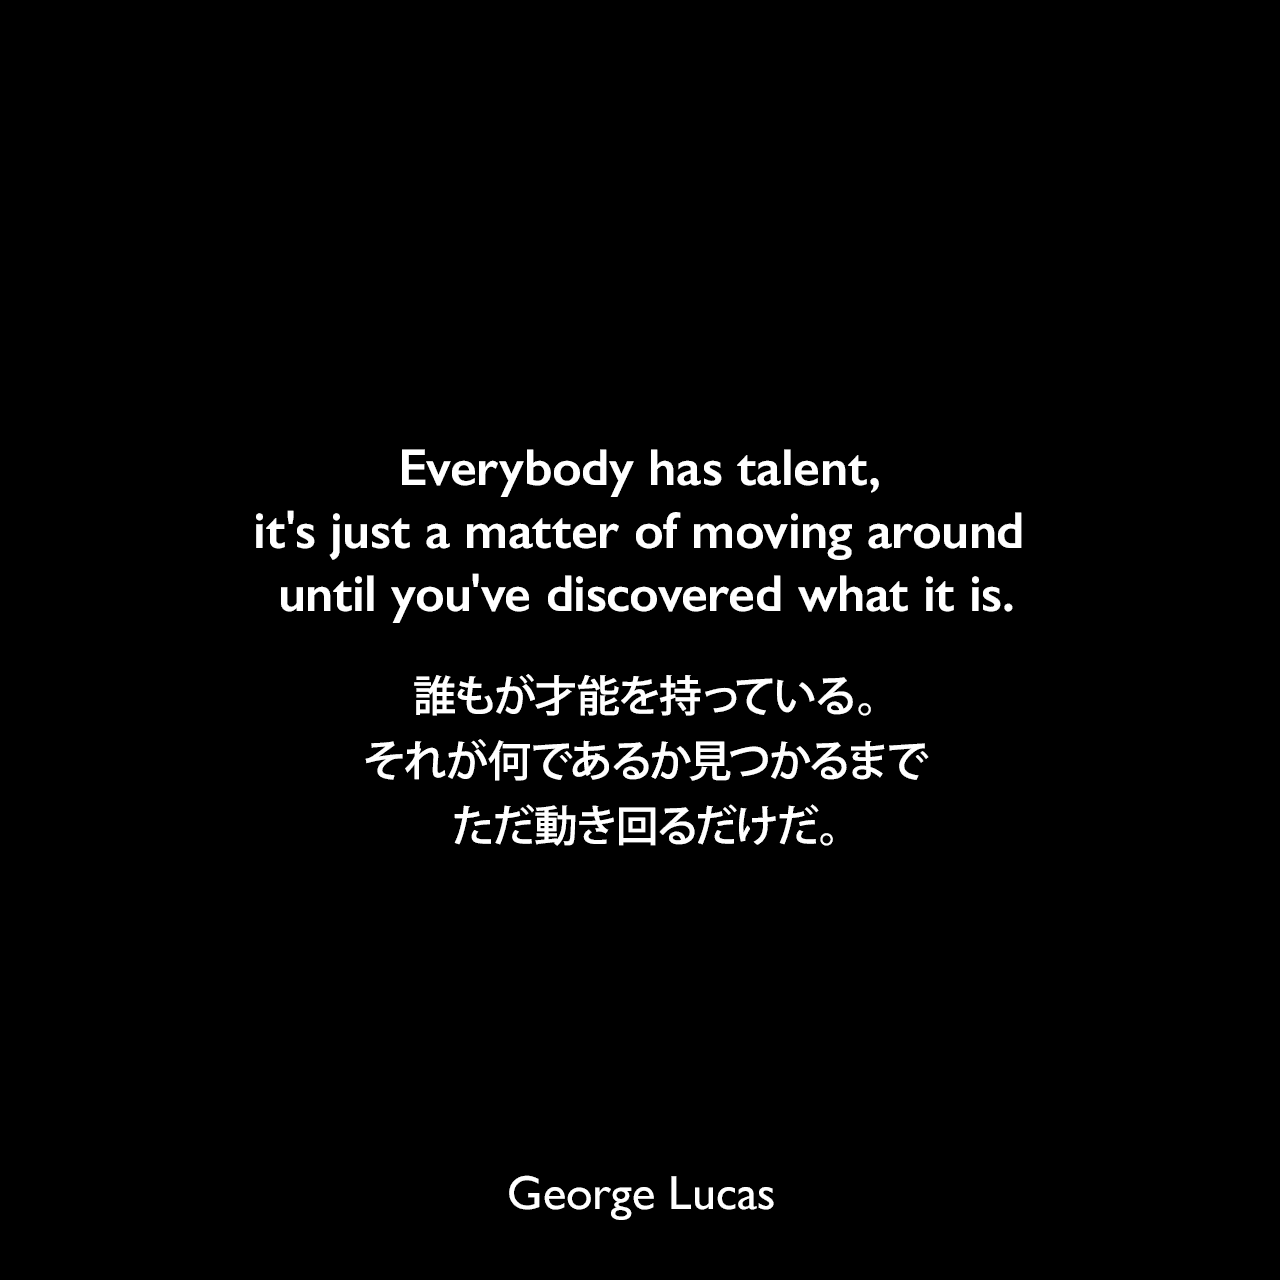 Everybody has talent, it's just a matter of moving around until you've discovered what it is.誰もが才能を持っている。それが何であるか見つかるまでただ動き回るだけだ。George Lucas